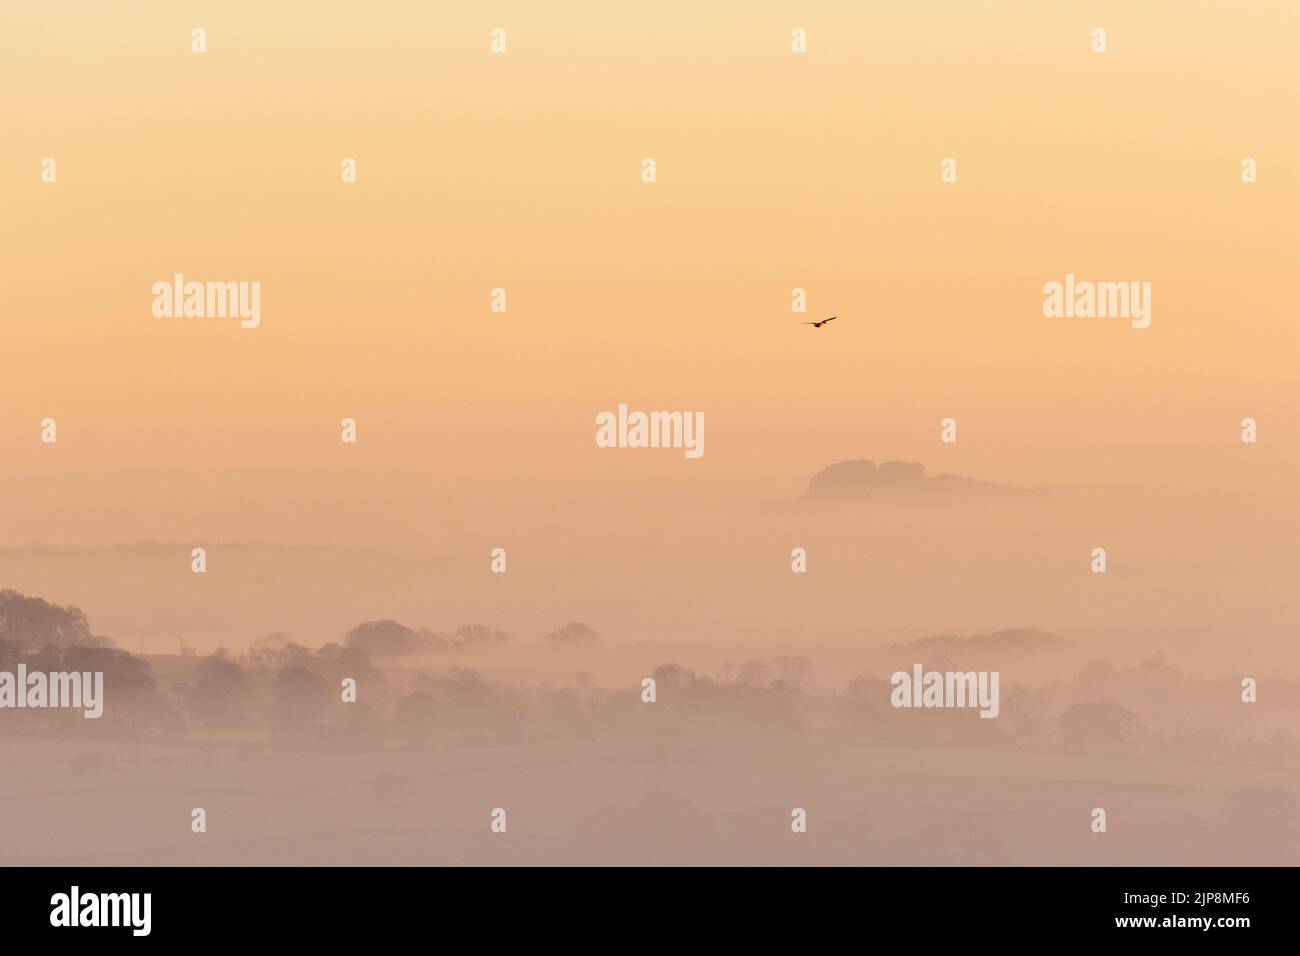 View of a mist filled Wharfedale valley with a single goose flying through the orange sky, West Yorkshire, England. Stock Photo